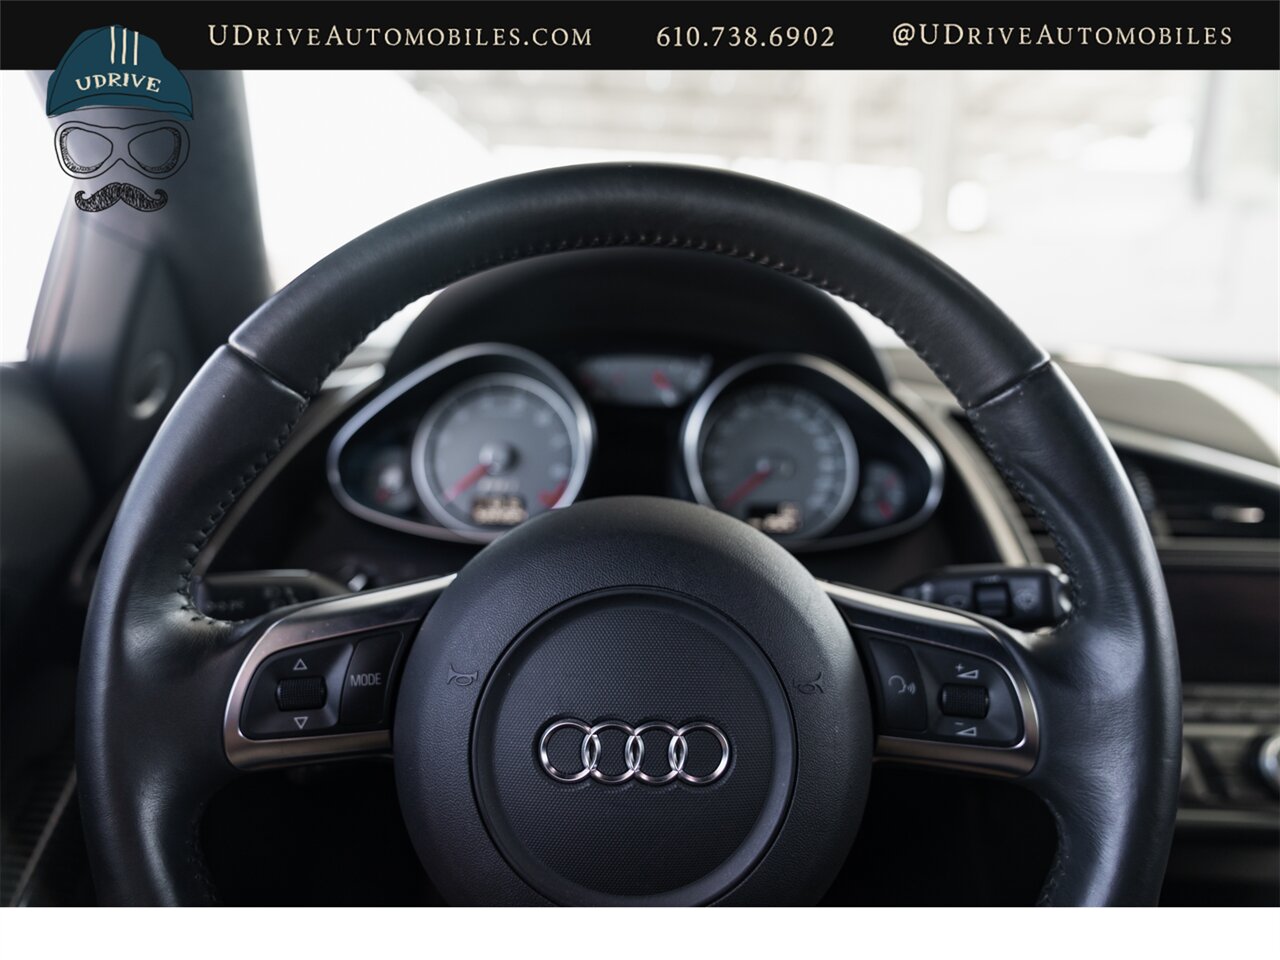 2009 Audi R8 Quattro  4.2L V8 6 Speed Manual - Photo 35 - West Chester, PA 19382